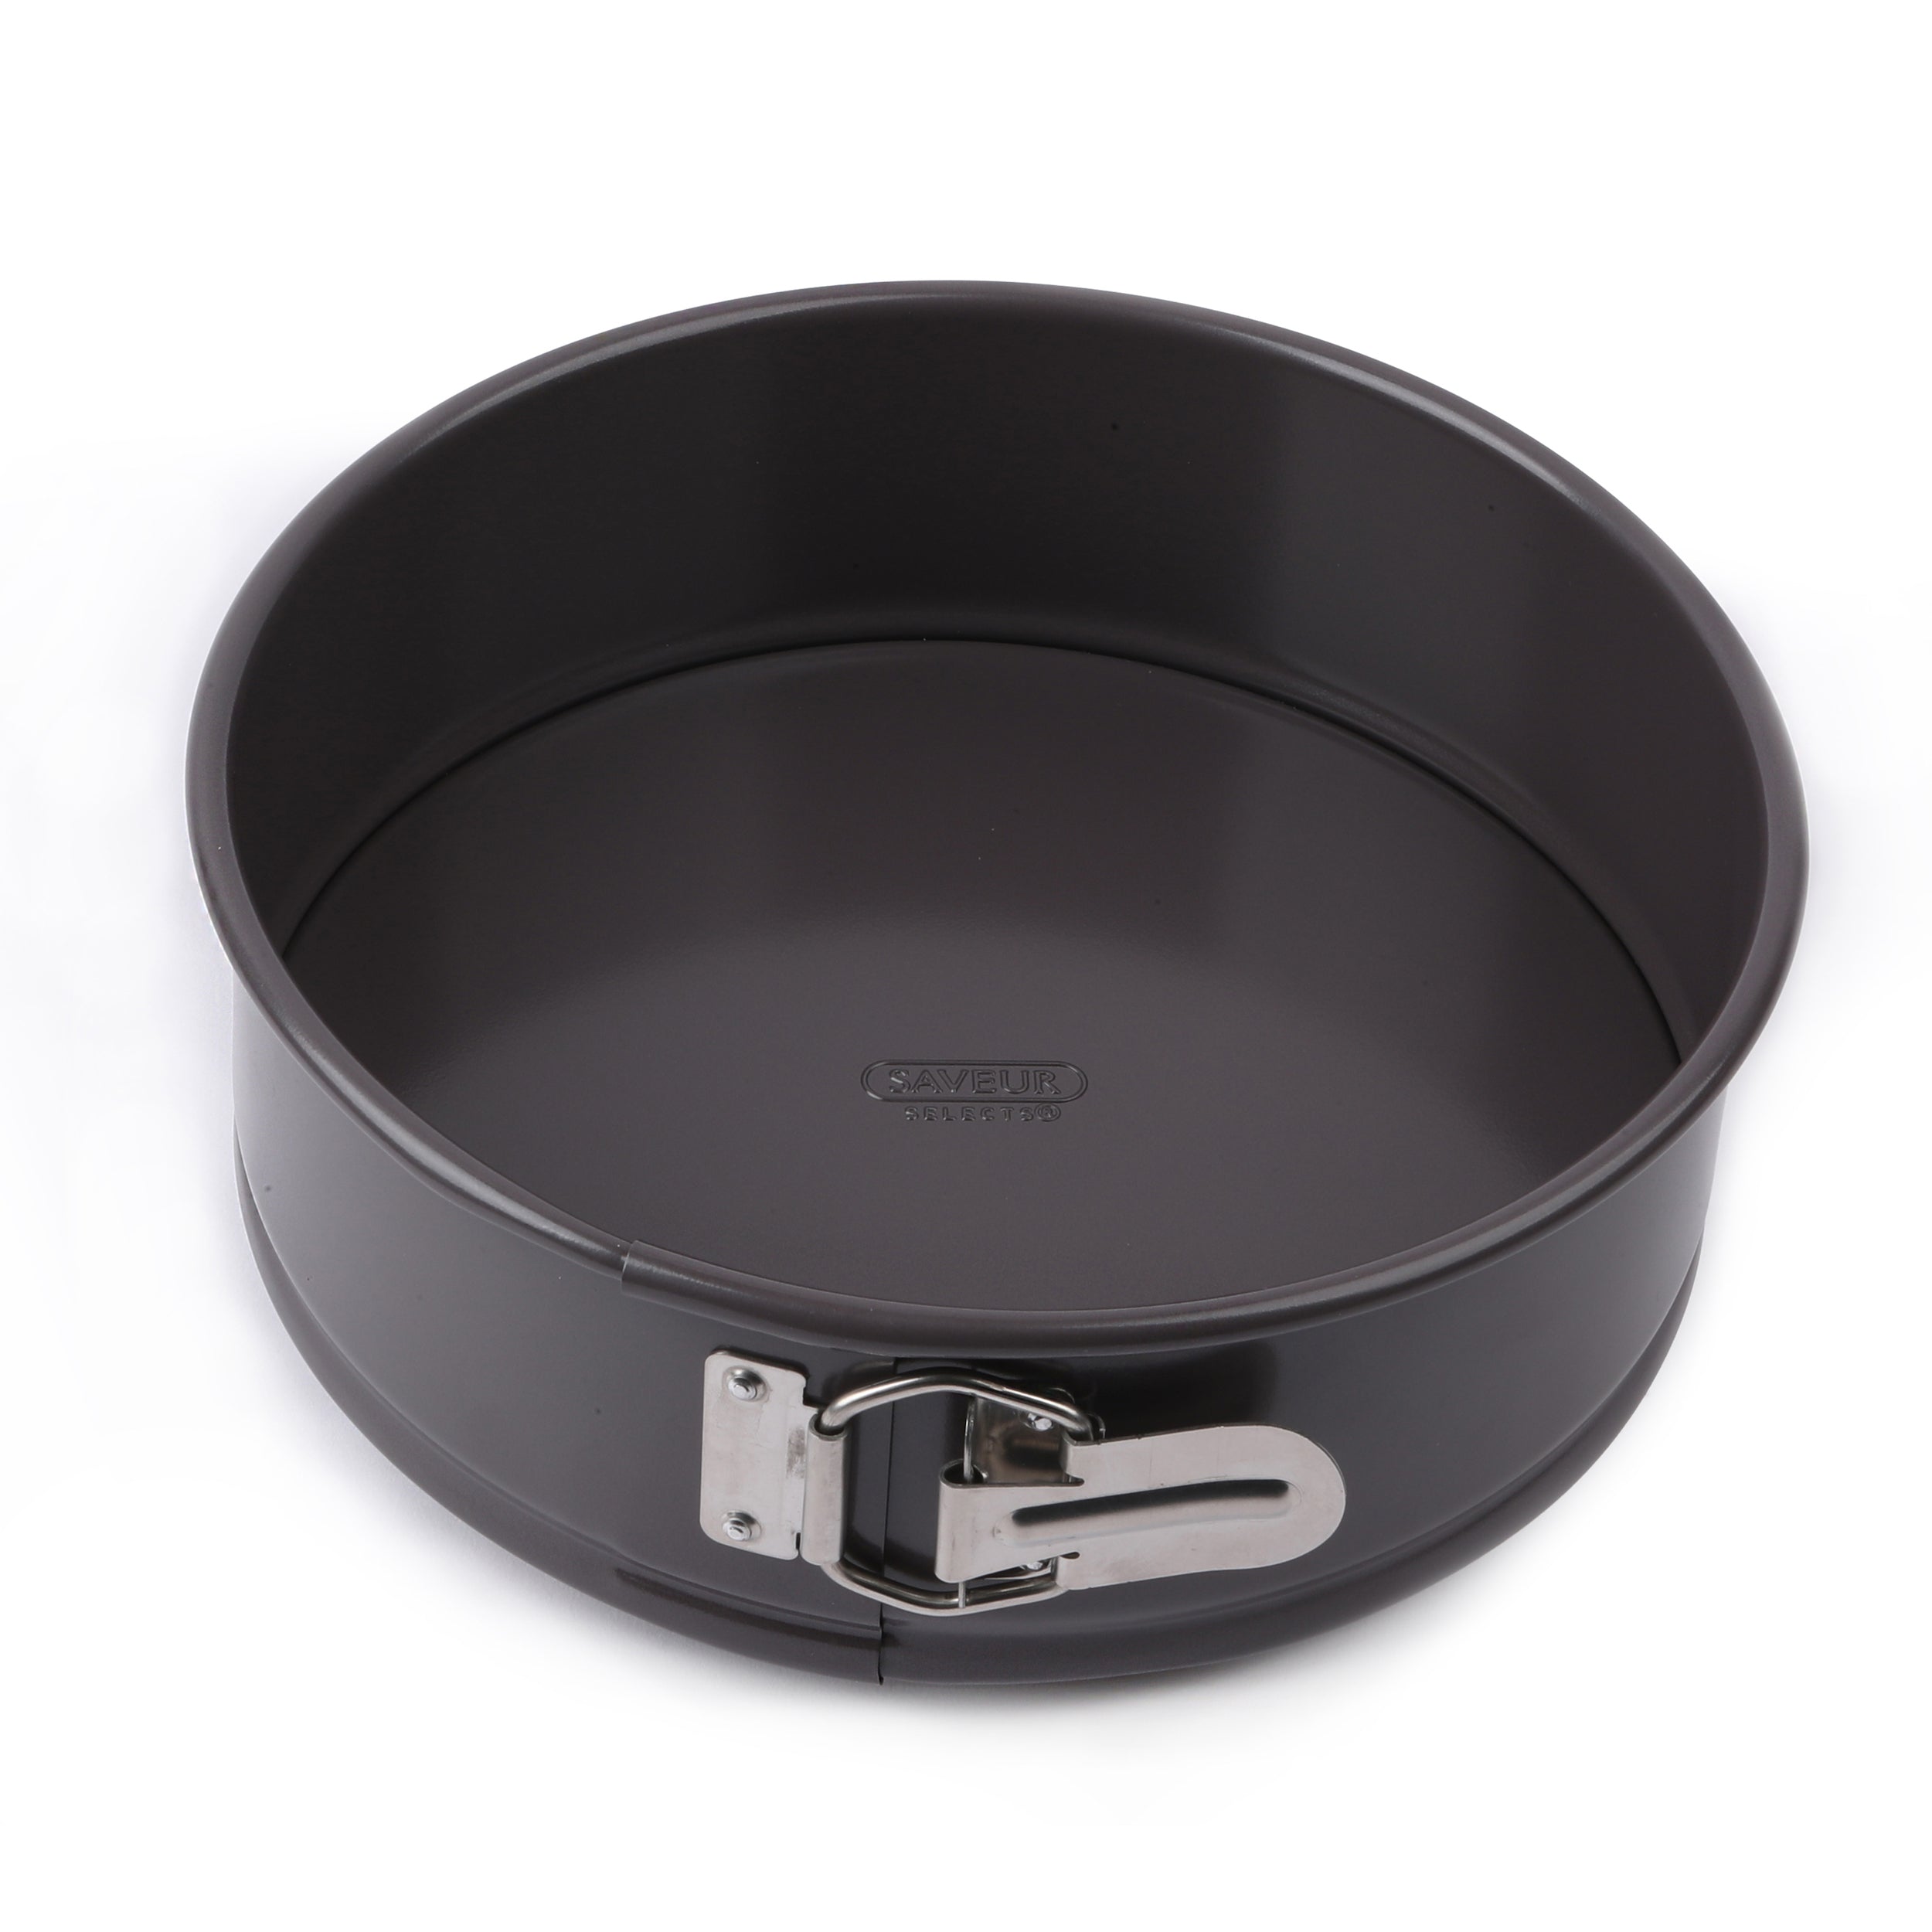 TWSCVC 9 Inch Springform Pan and Bundt Pan,Non-stick Cheesecake Pan and  Ice-cream Cake Bakeware, Carbon Steel Tube Pan 2 in 1 with Removable Bottom